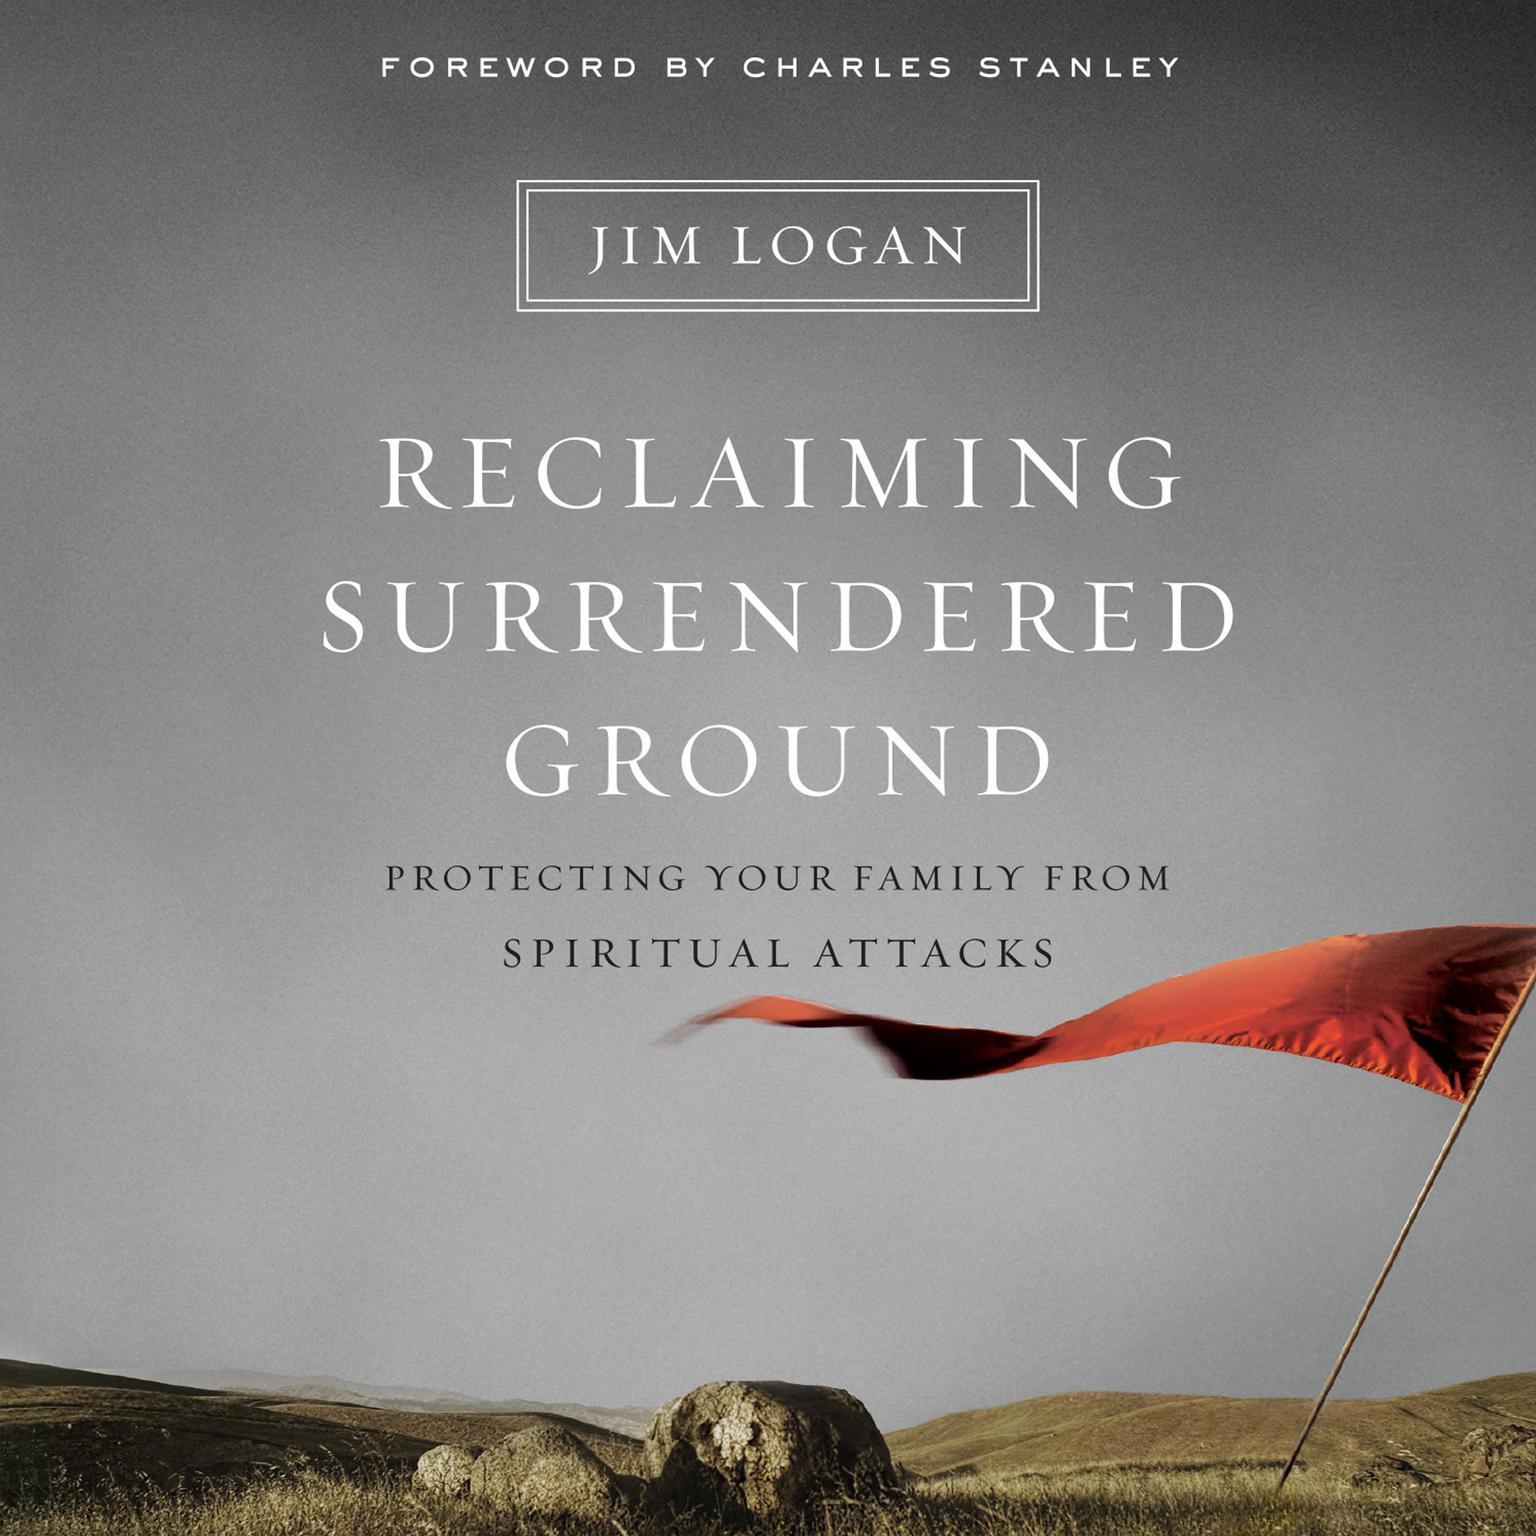 Reclaiming Surrendered Ground: Protecting Your Family from Spiritual Attacks Audiobook, by Jim Logan